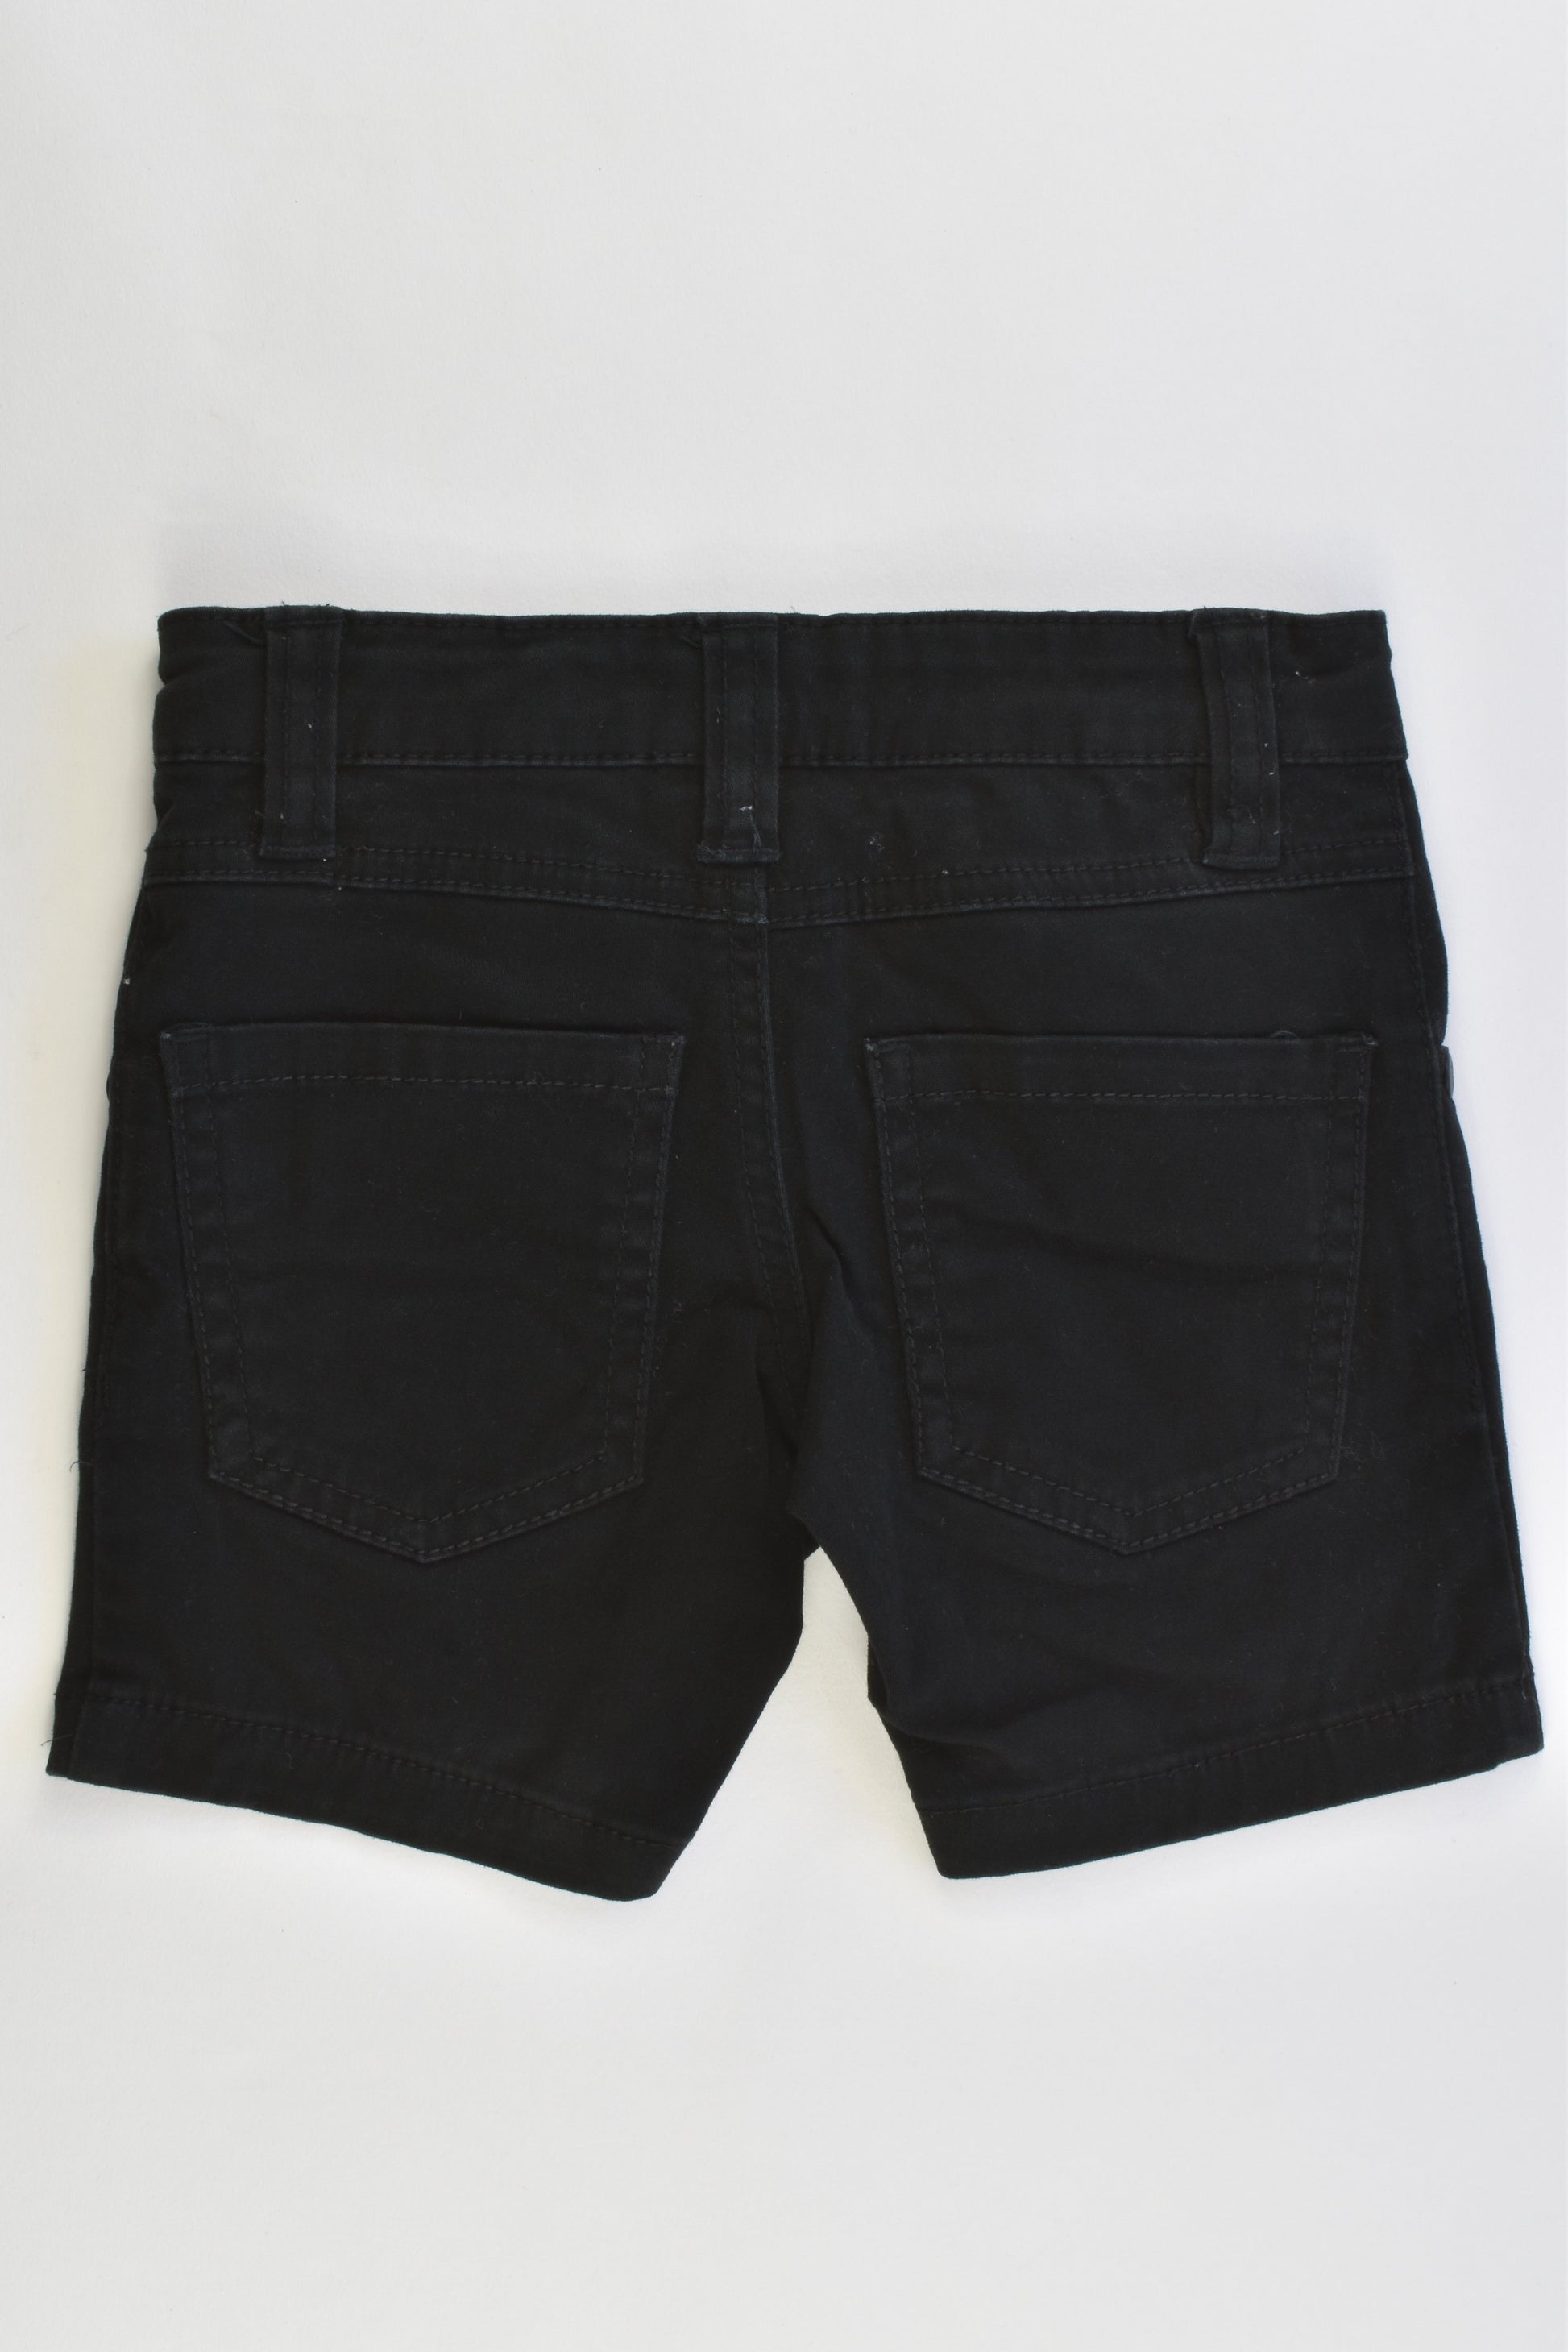 Breakers Size 3 Stretchy Shorts